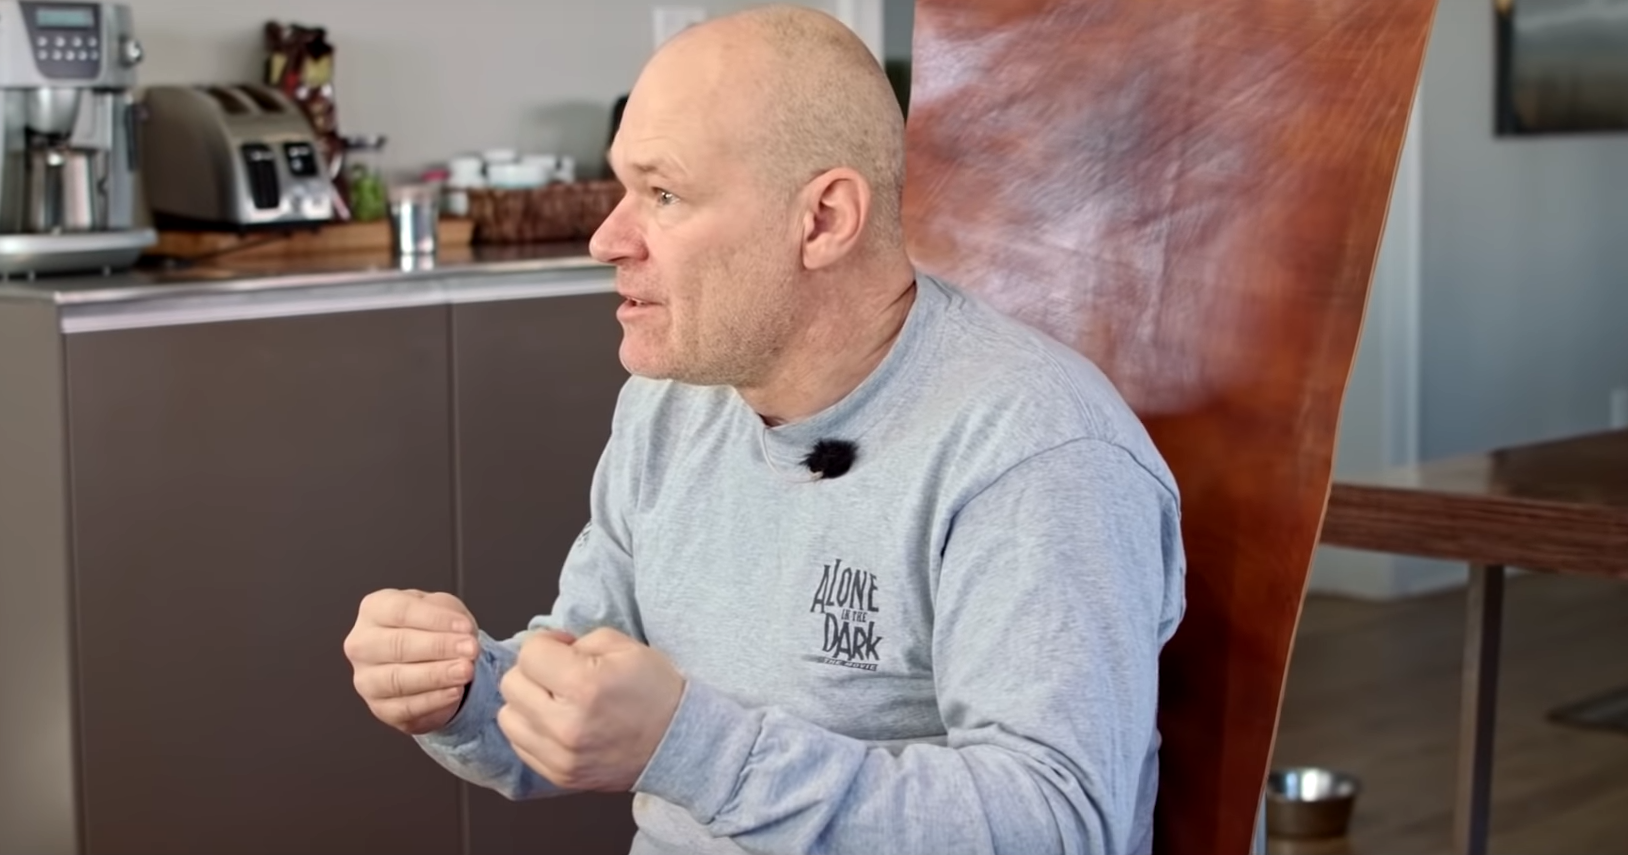 Uwe Boll looking cheerful and slightly punchy while wearing a pale gray Alone in the Dark sweater and explaining something to a figure off camera.